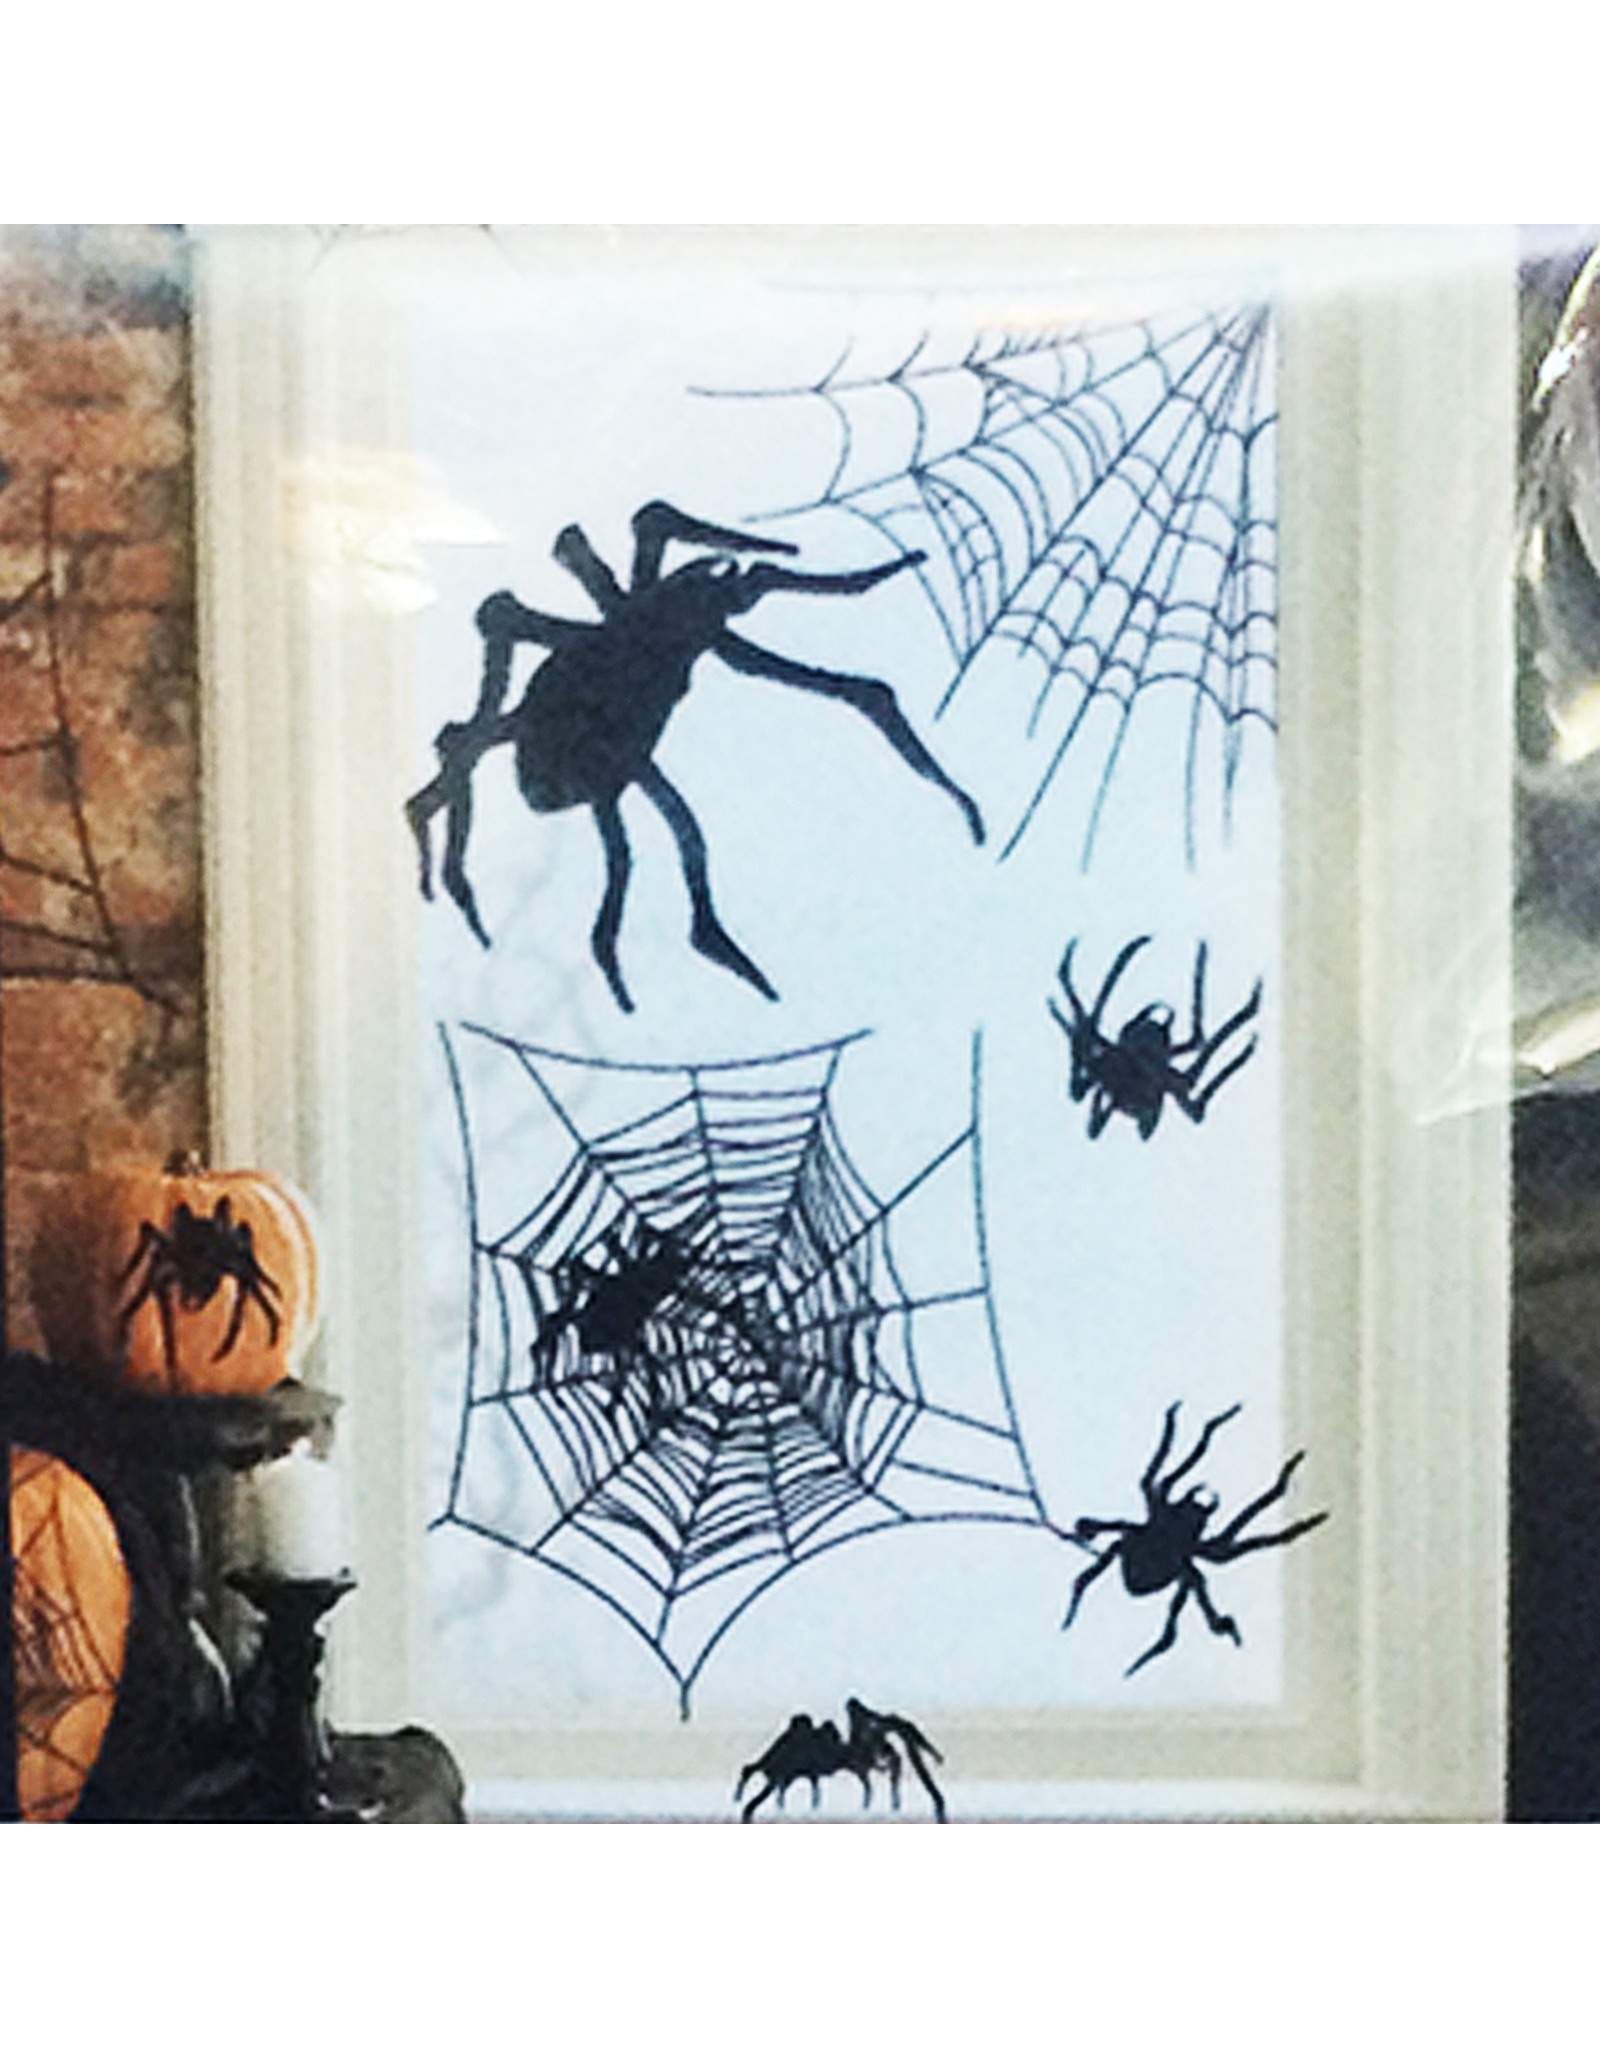 Darice Halloween Removable Wall Art Decals 2 Sheets - Spiders